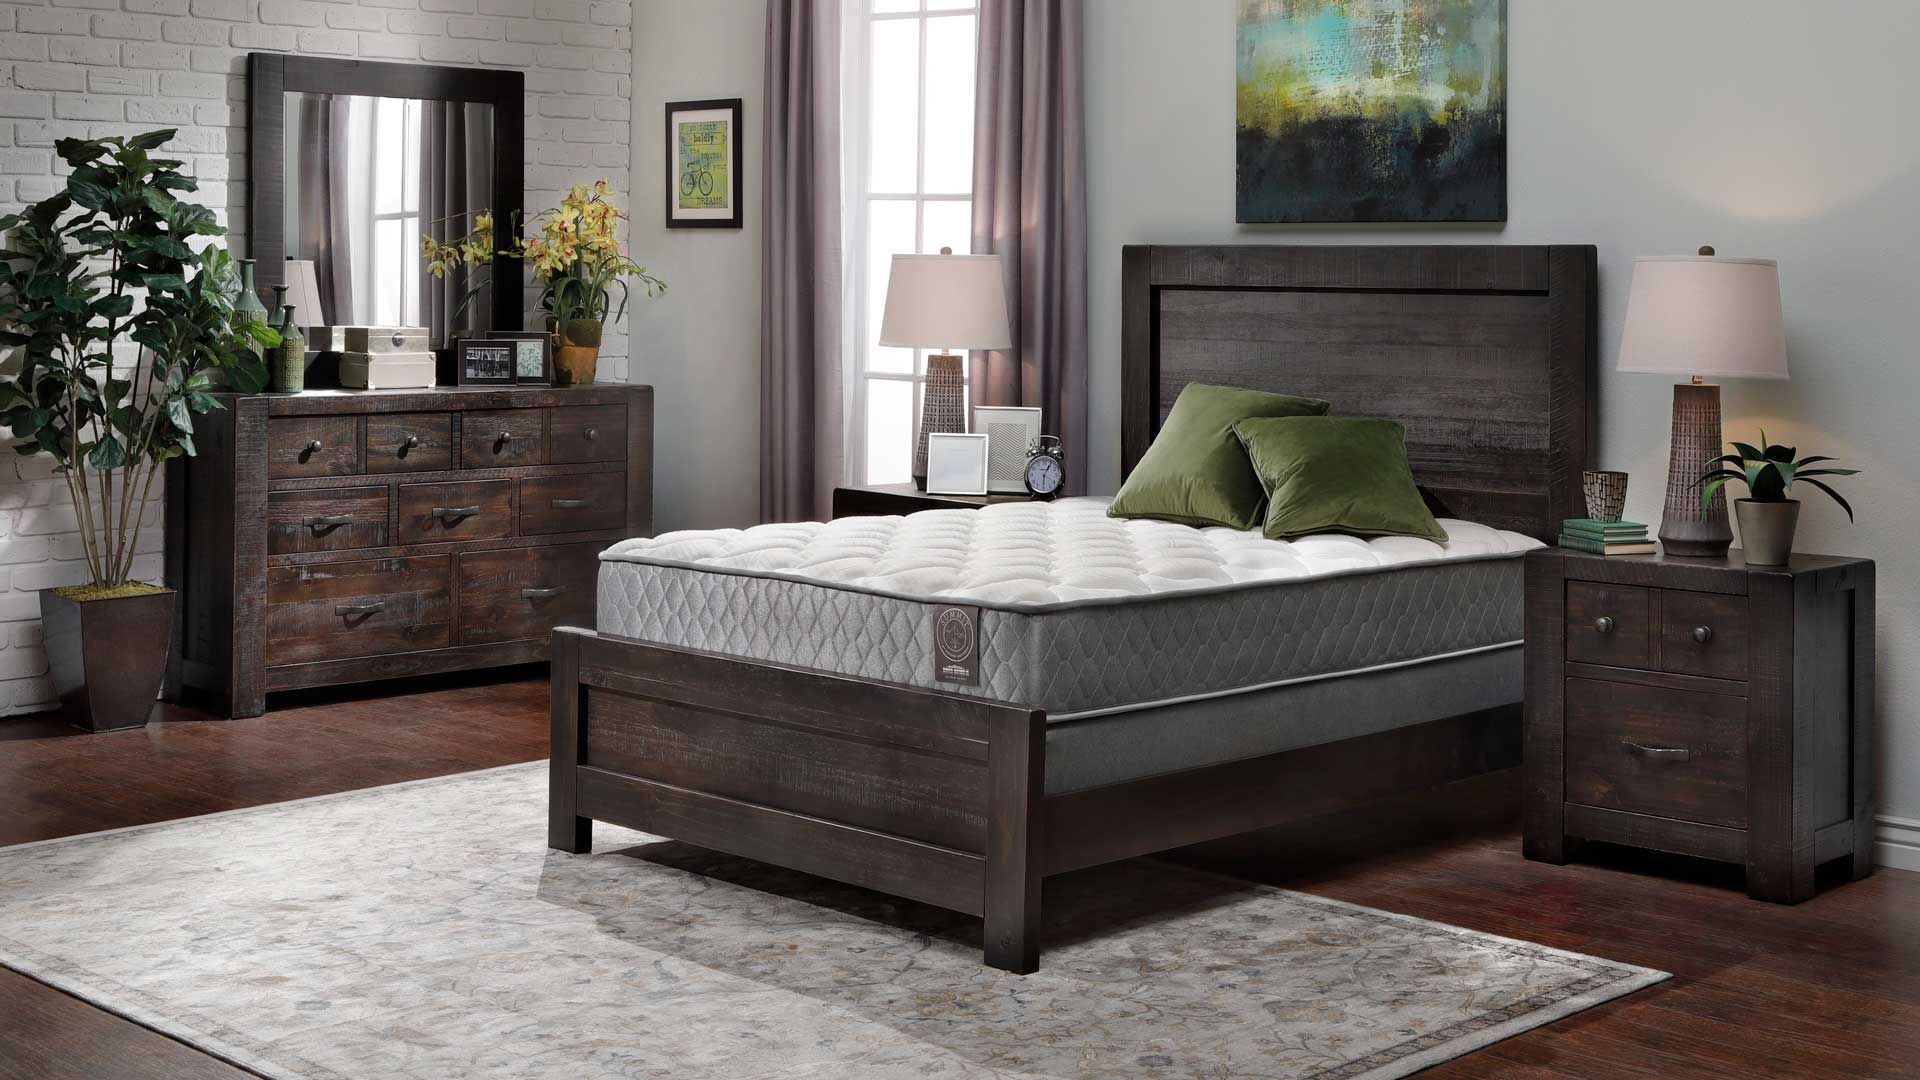 Best Place To Buy a Mattress Illinois